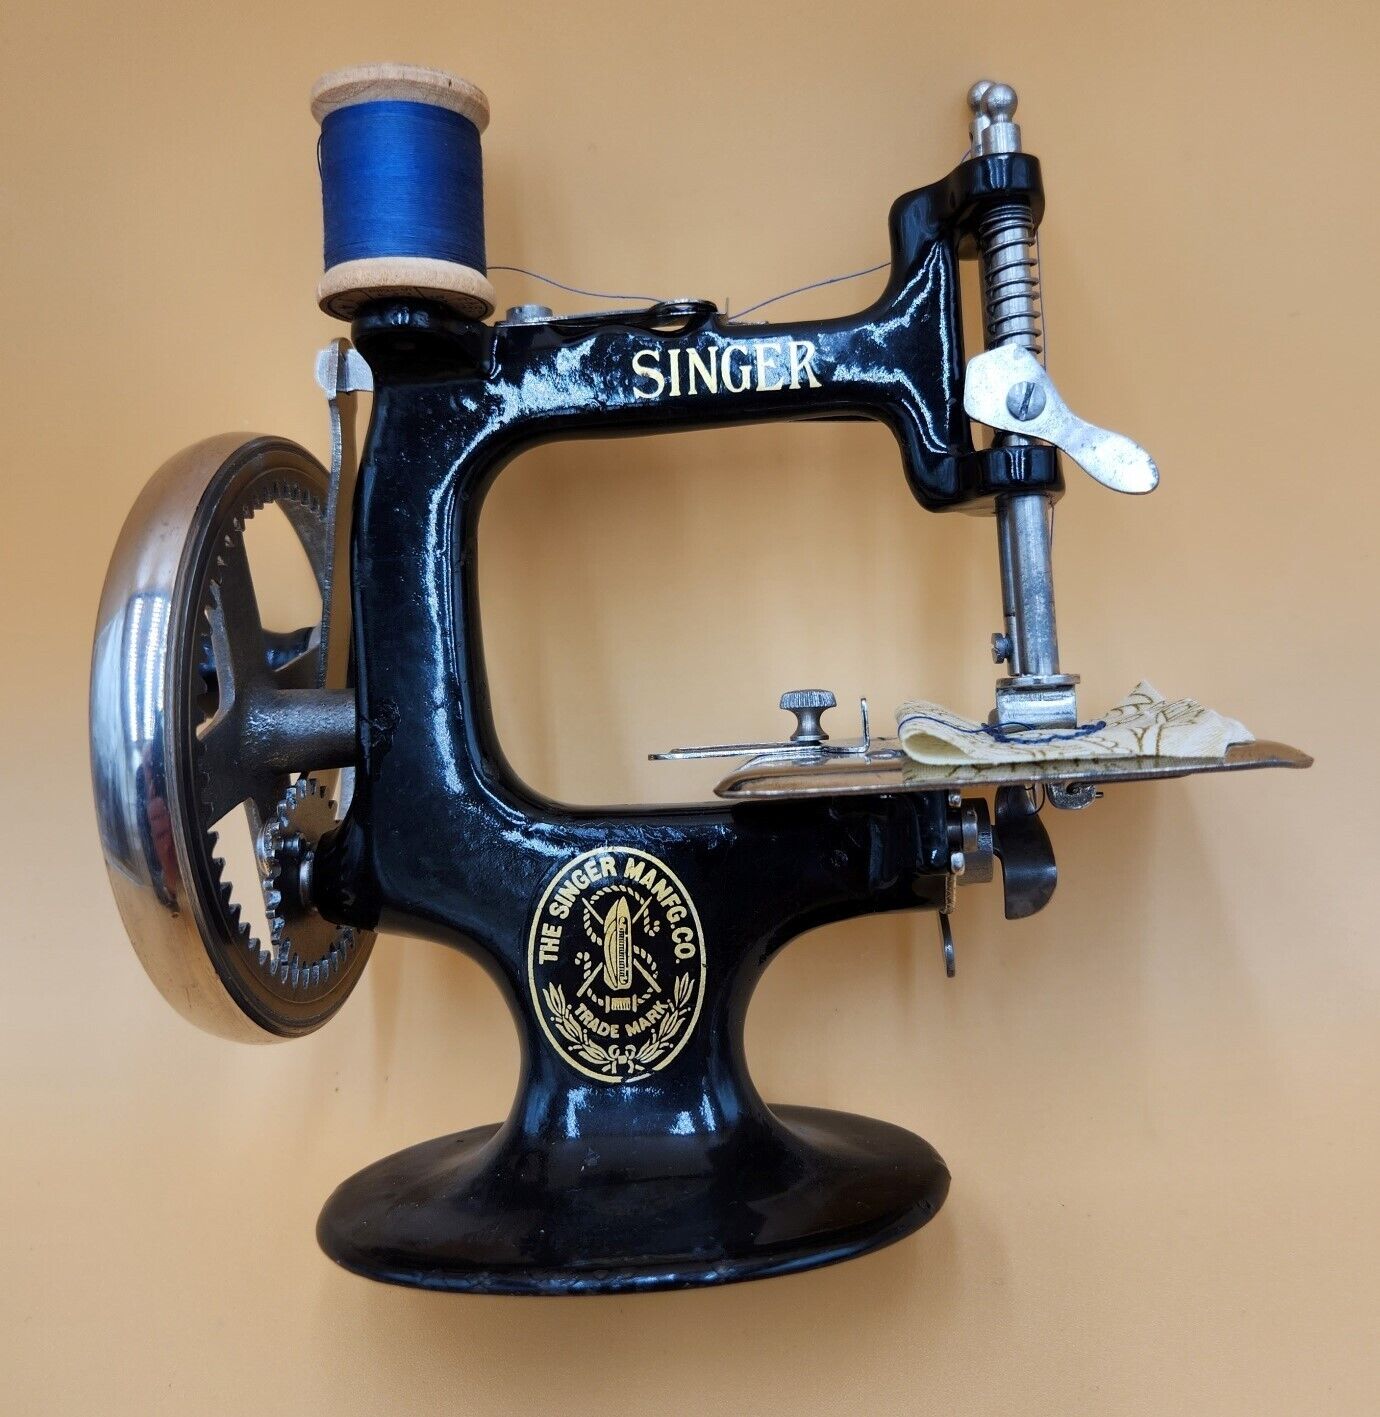 SINGER 20 Child Toy Sewing Machine 4 Spokes 20-1 1910s totaly Restored